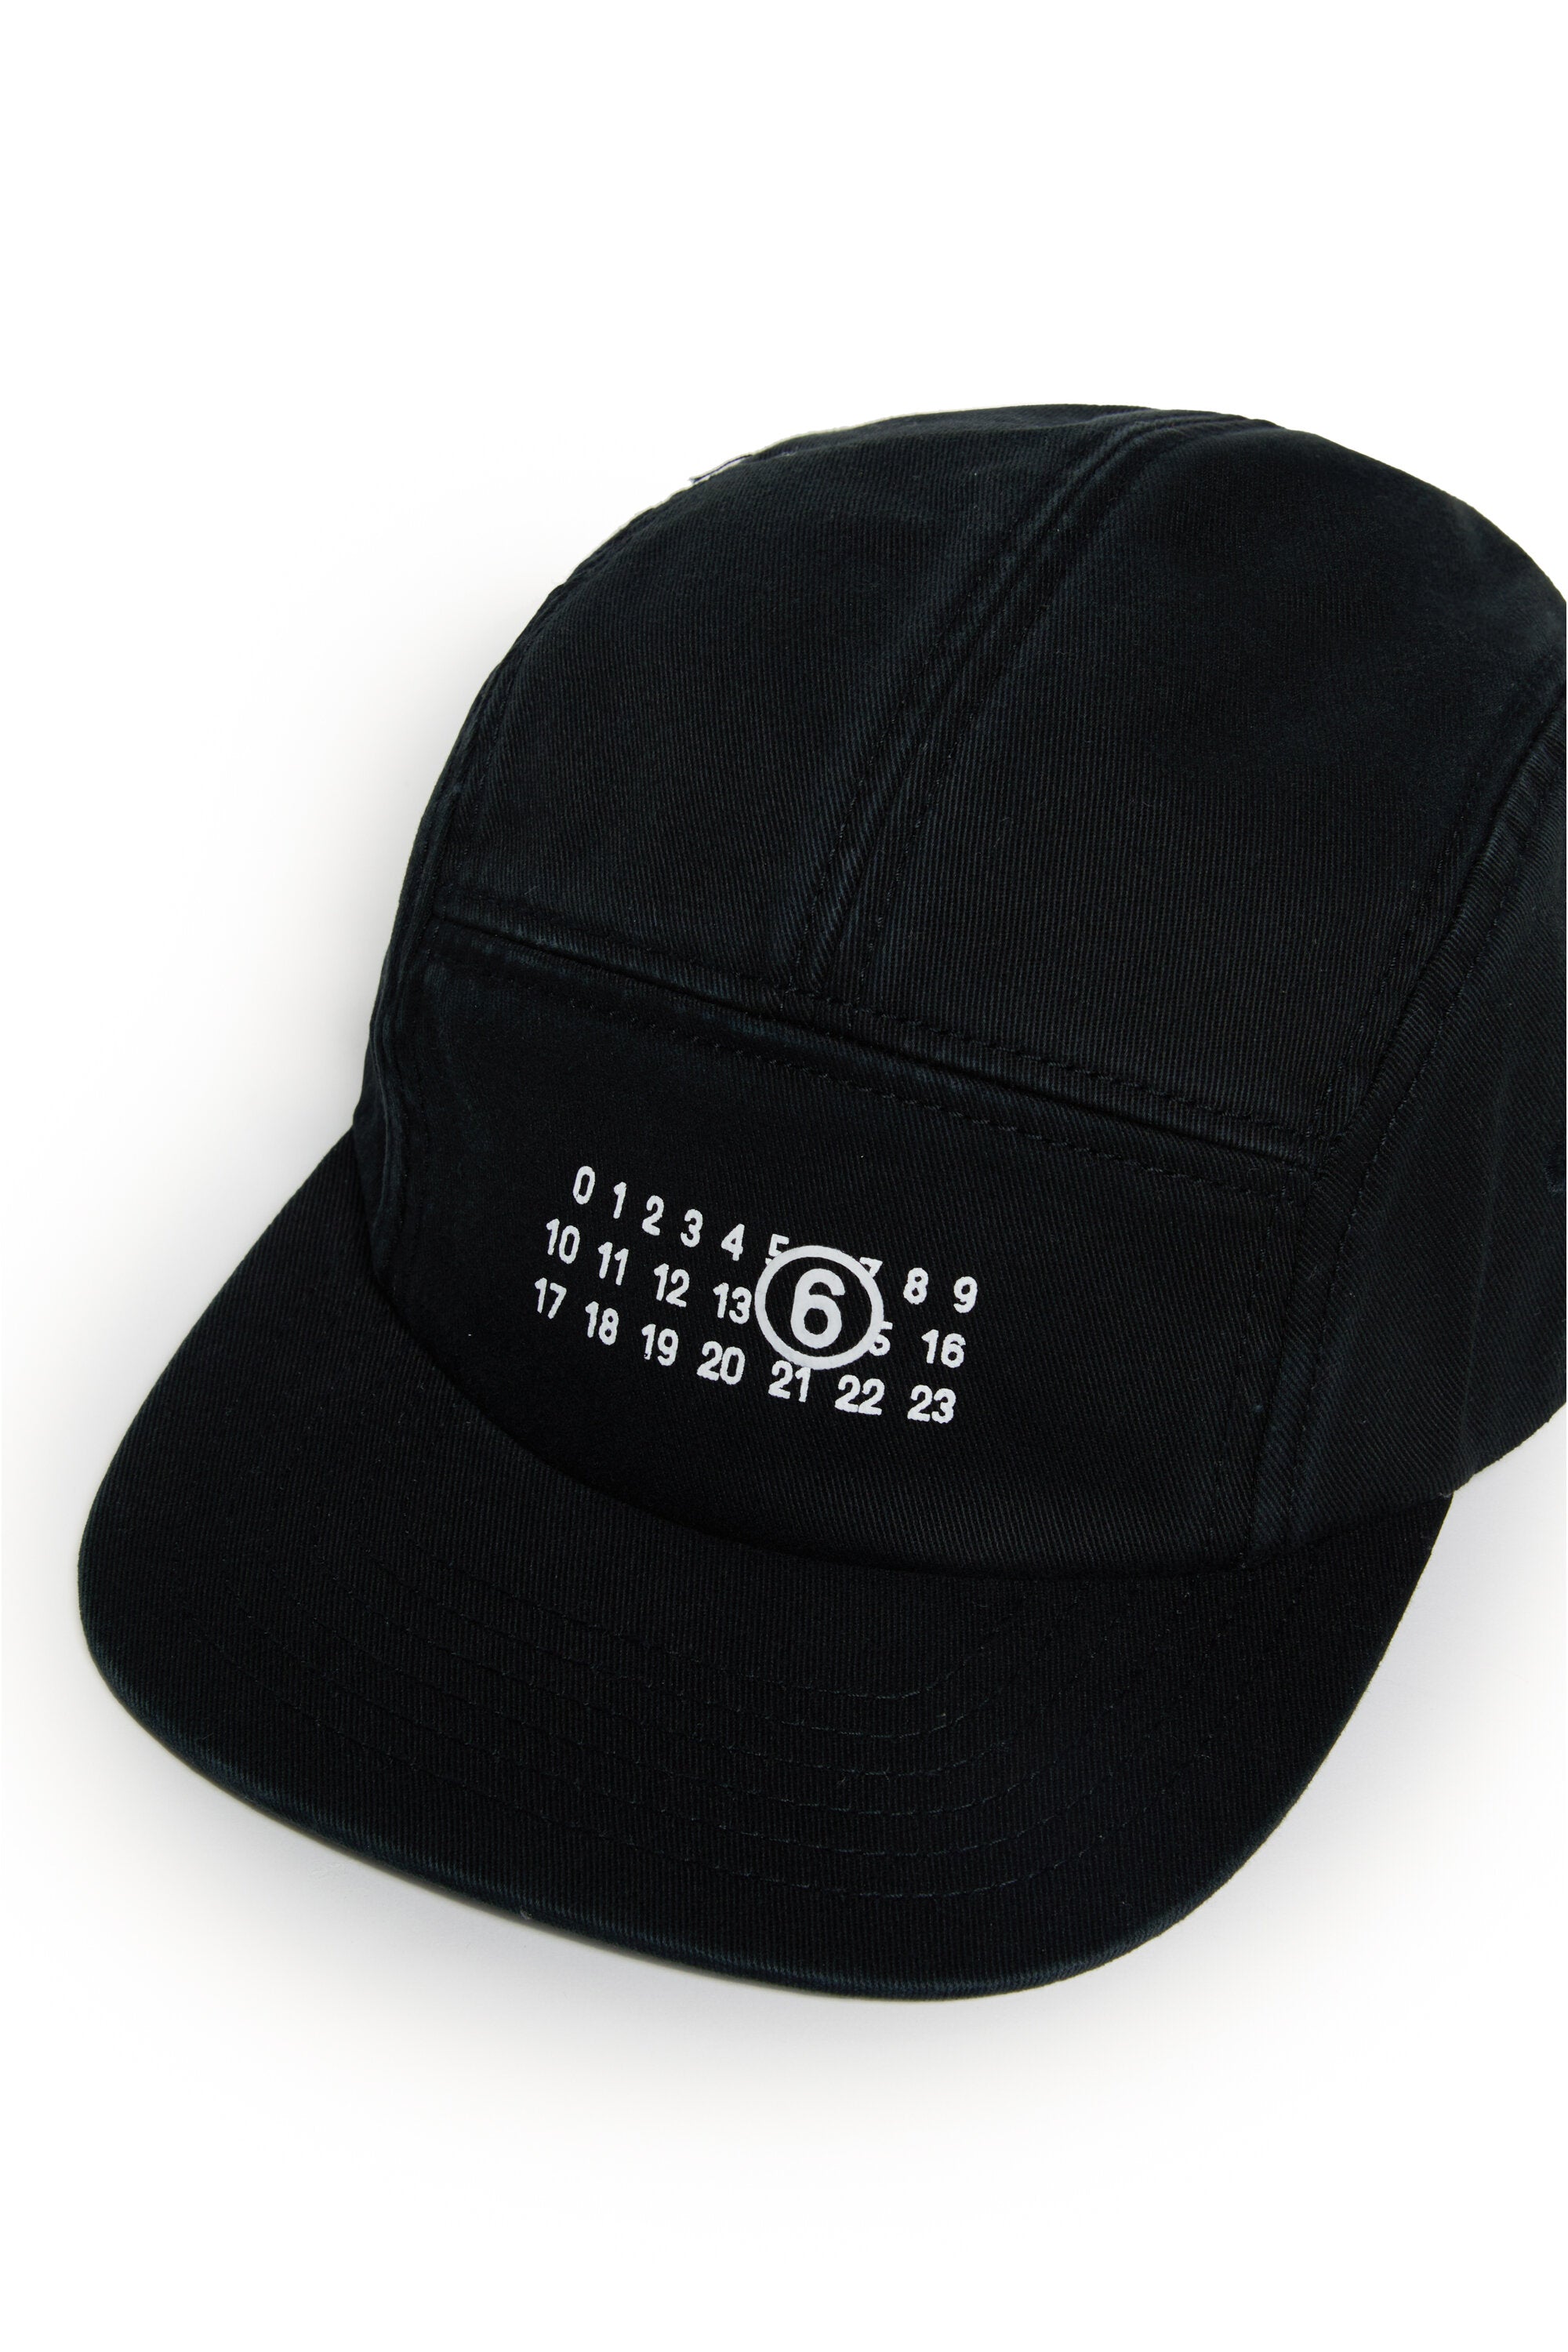 Five-panel hat branded with numeric logo